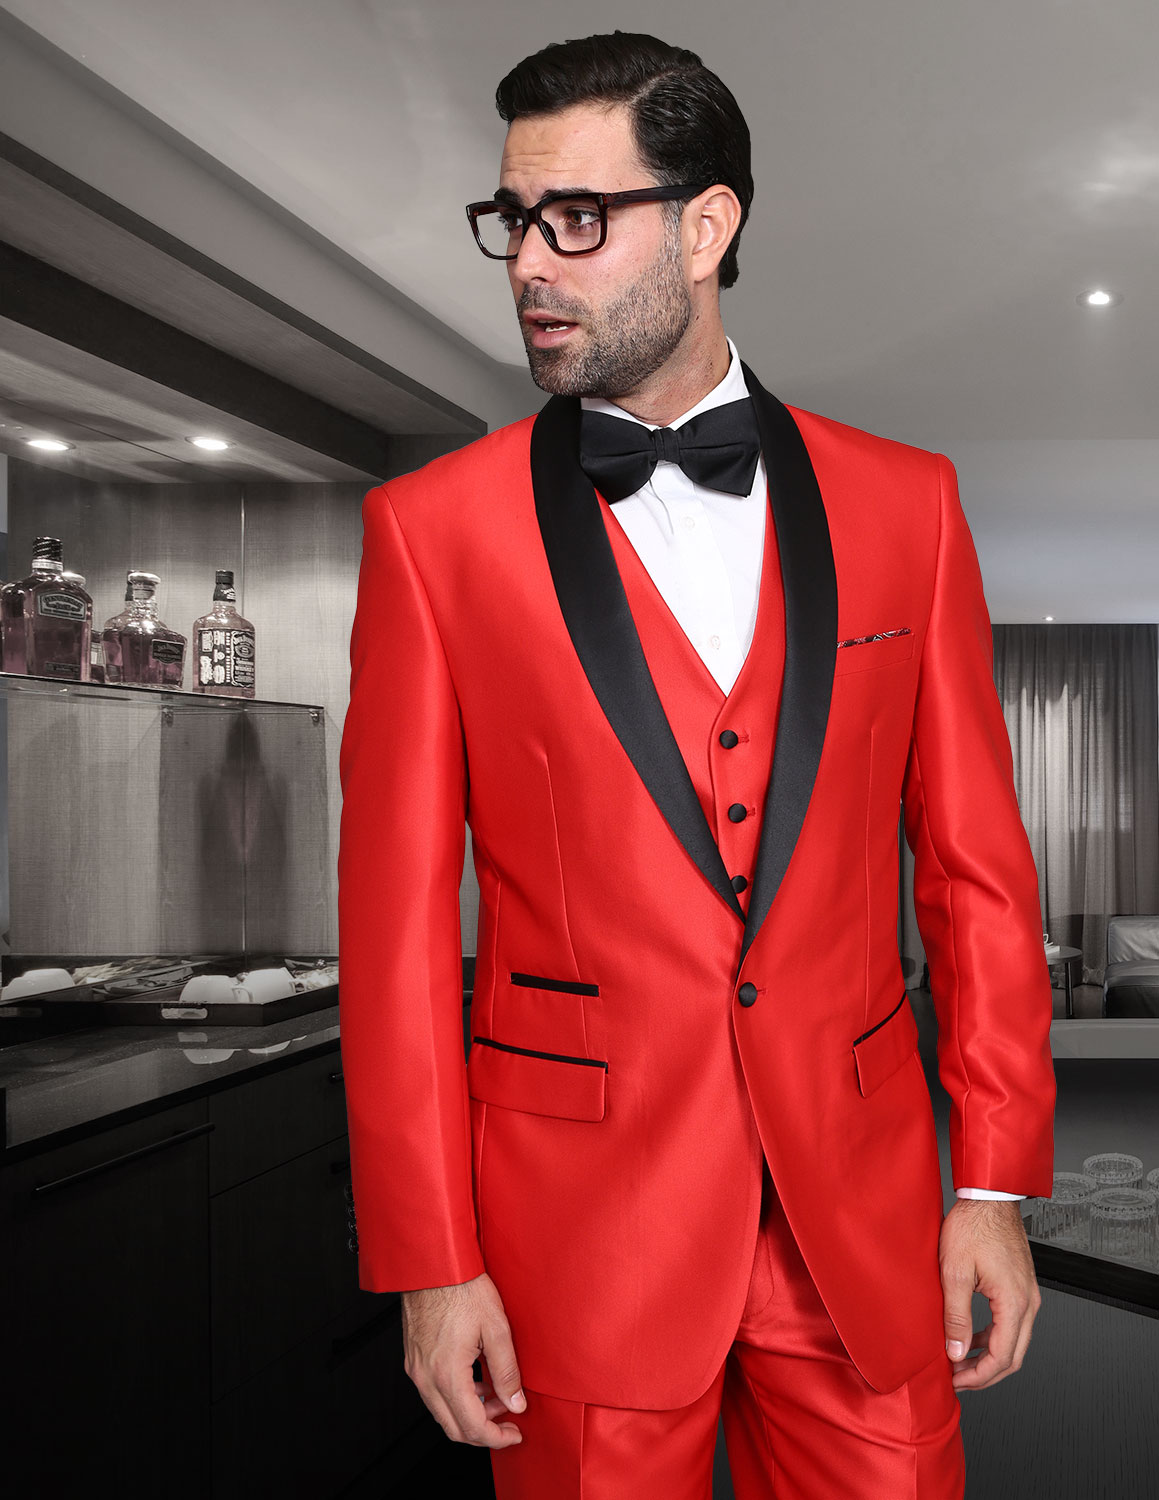 STATEMENT TUX-SH RED 3PC TAILORED FIT TUXEDO SUIT WITH FLAT FRONT PANTS INCLUDING MATCHING BOWTIE   